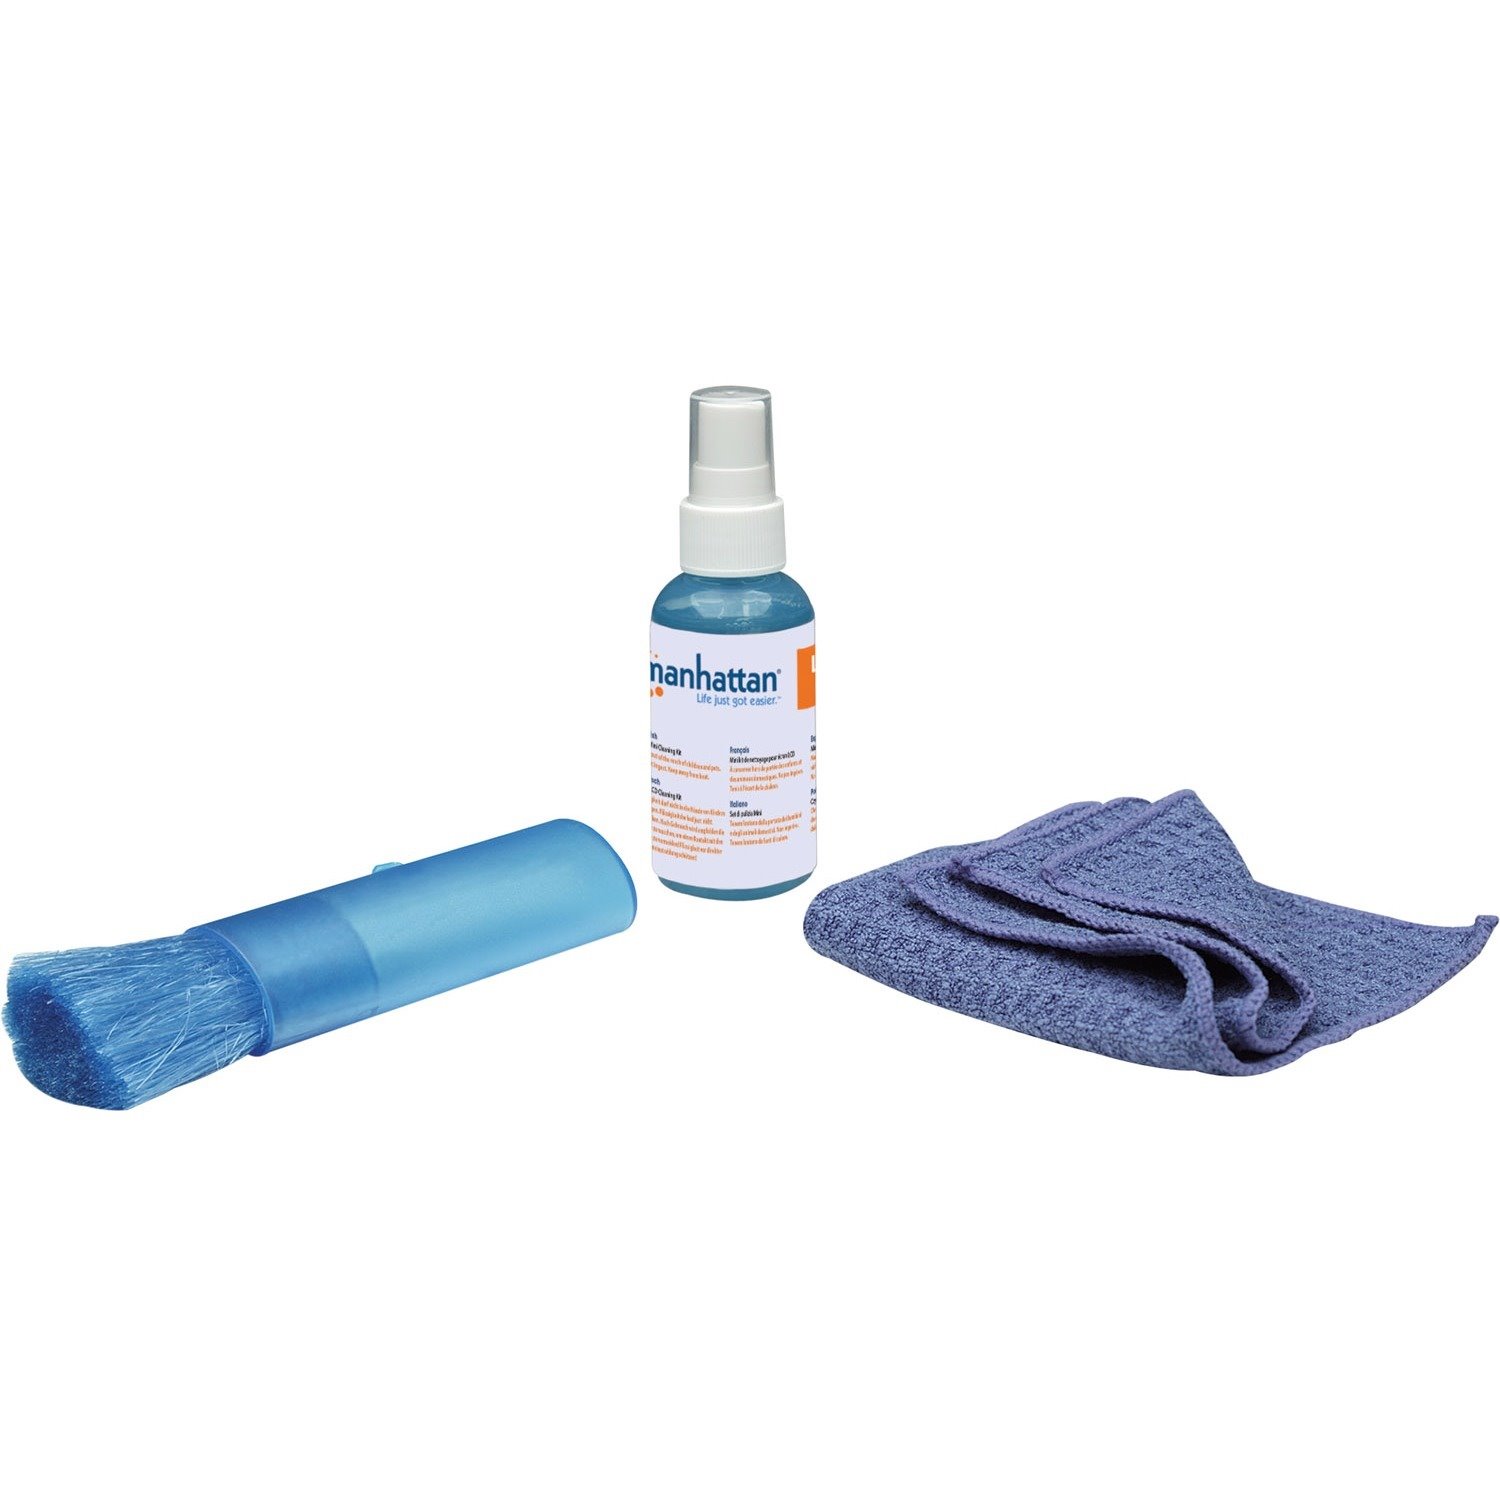 Manhattan LCD Mini Cleaning Kit (2 ounces) with Microfiber Cloth, Retractable Brush & Carrying Bag